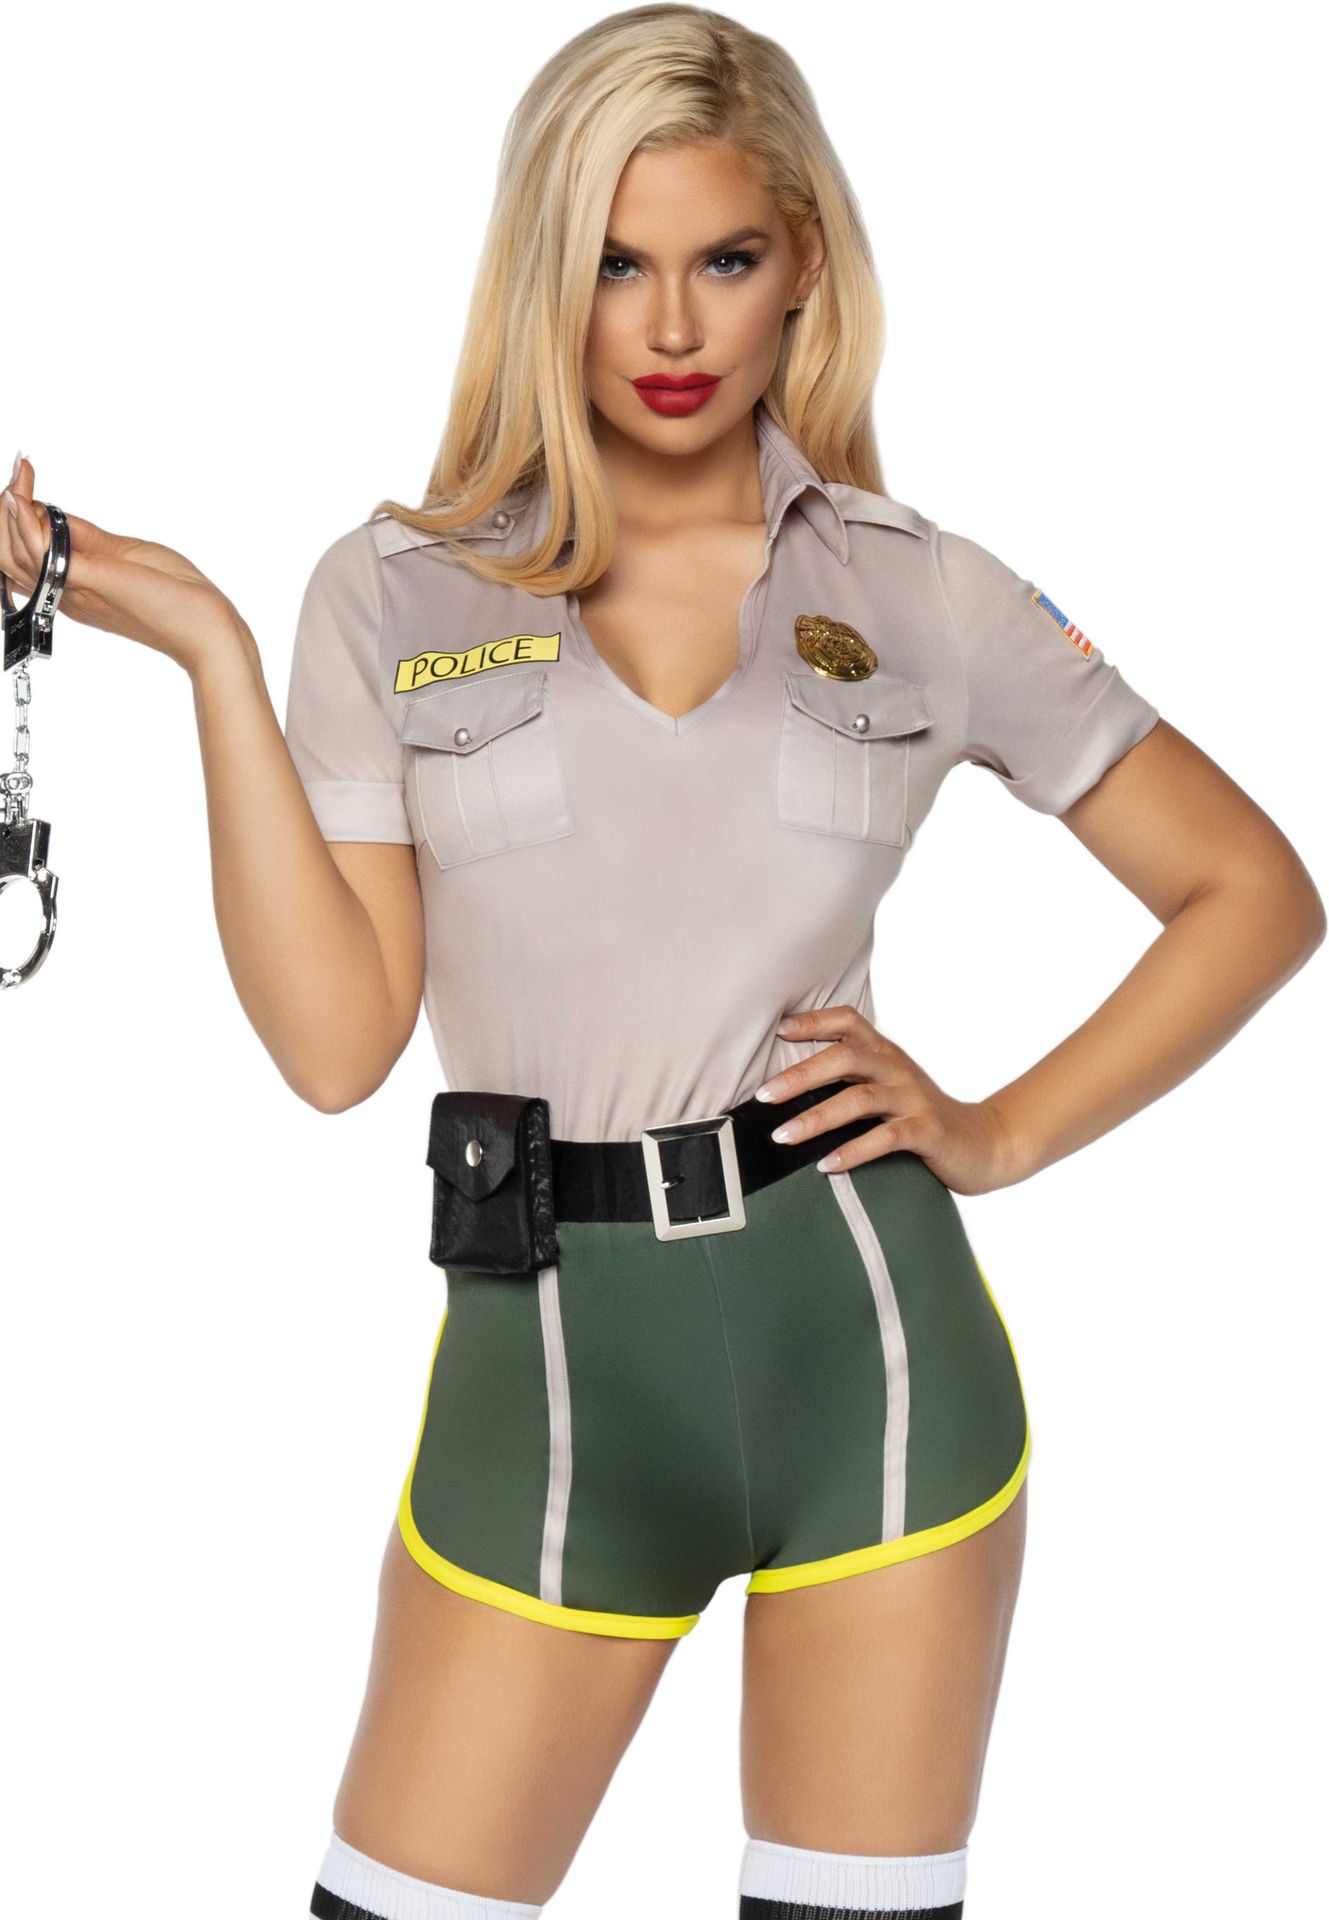 Sexy USA politie outfit met accessoires